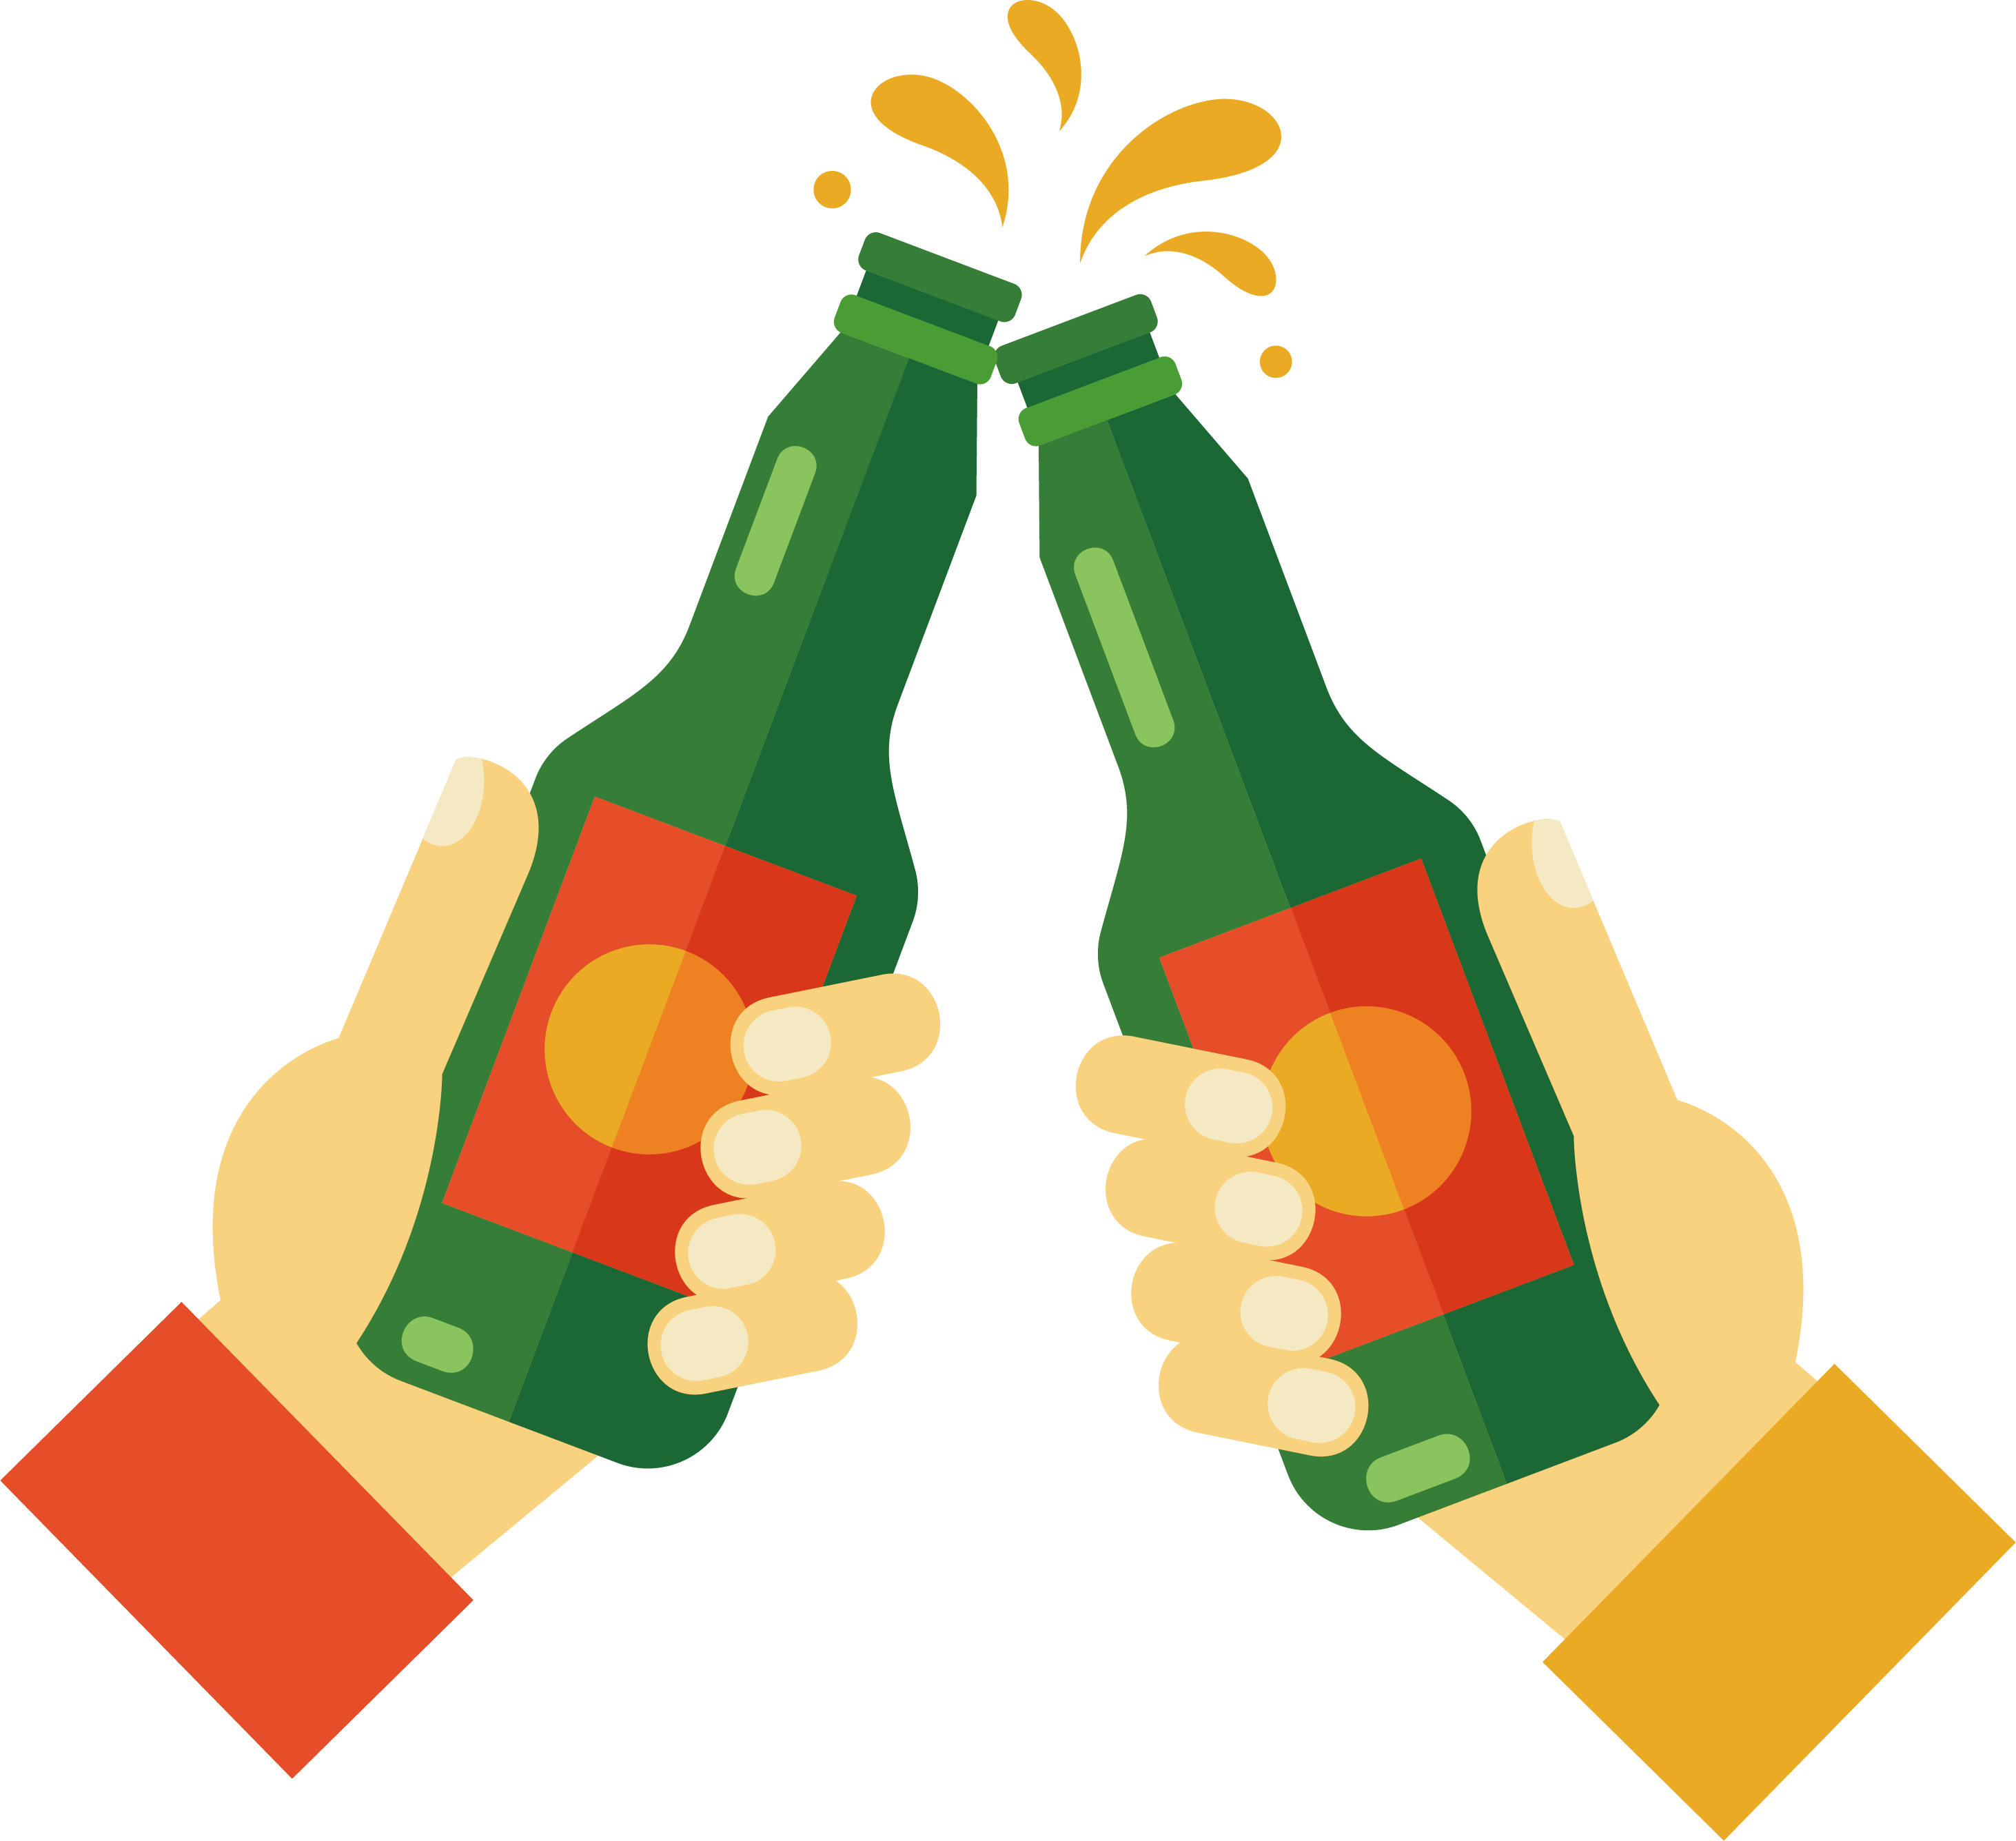 Clipart beer toast. Bottle icon raise the